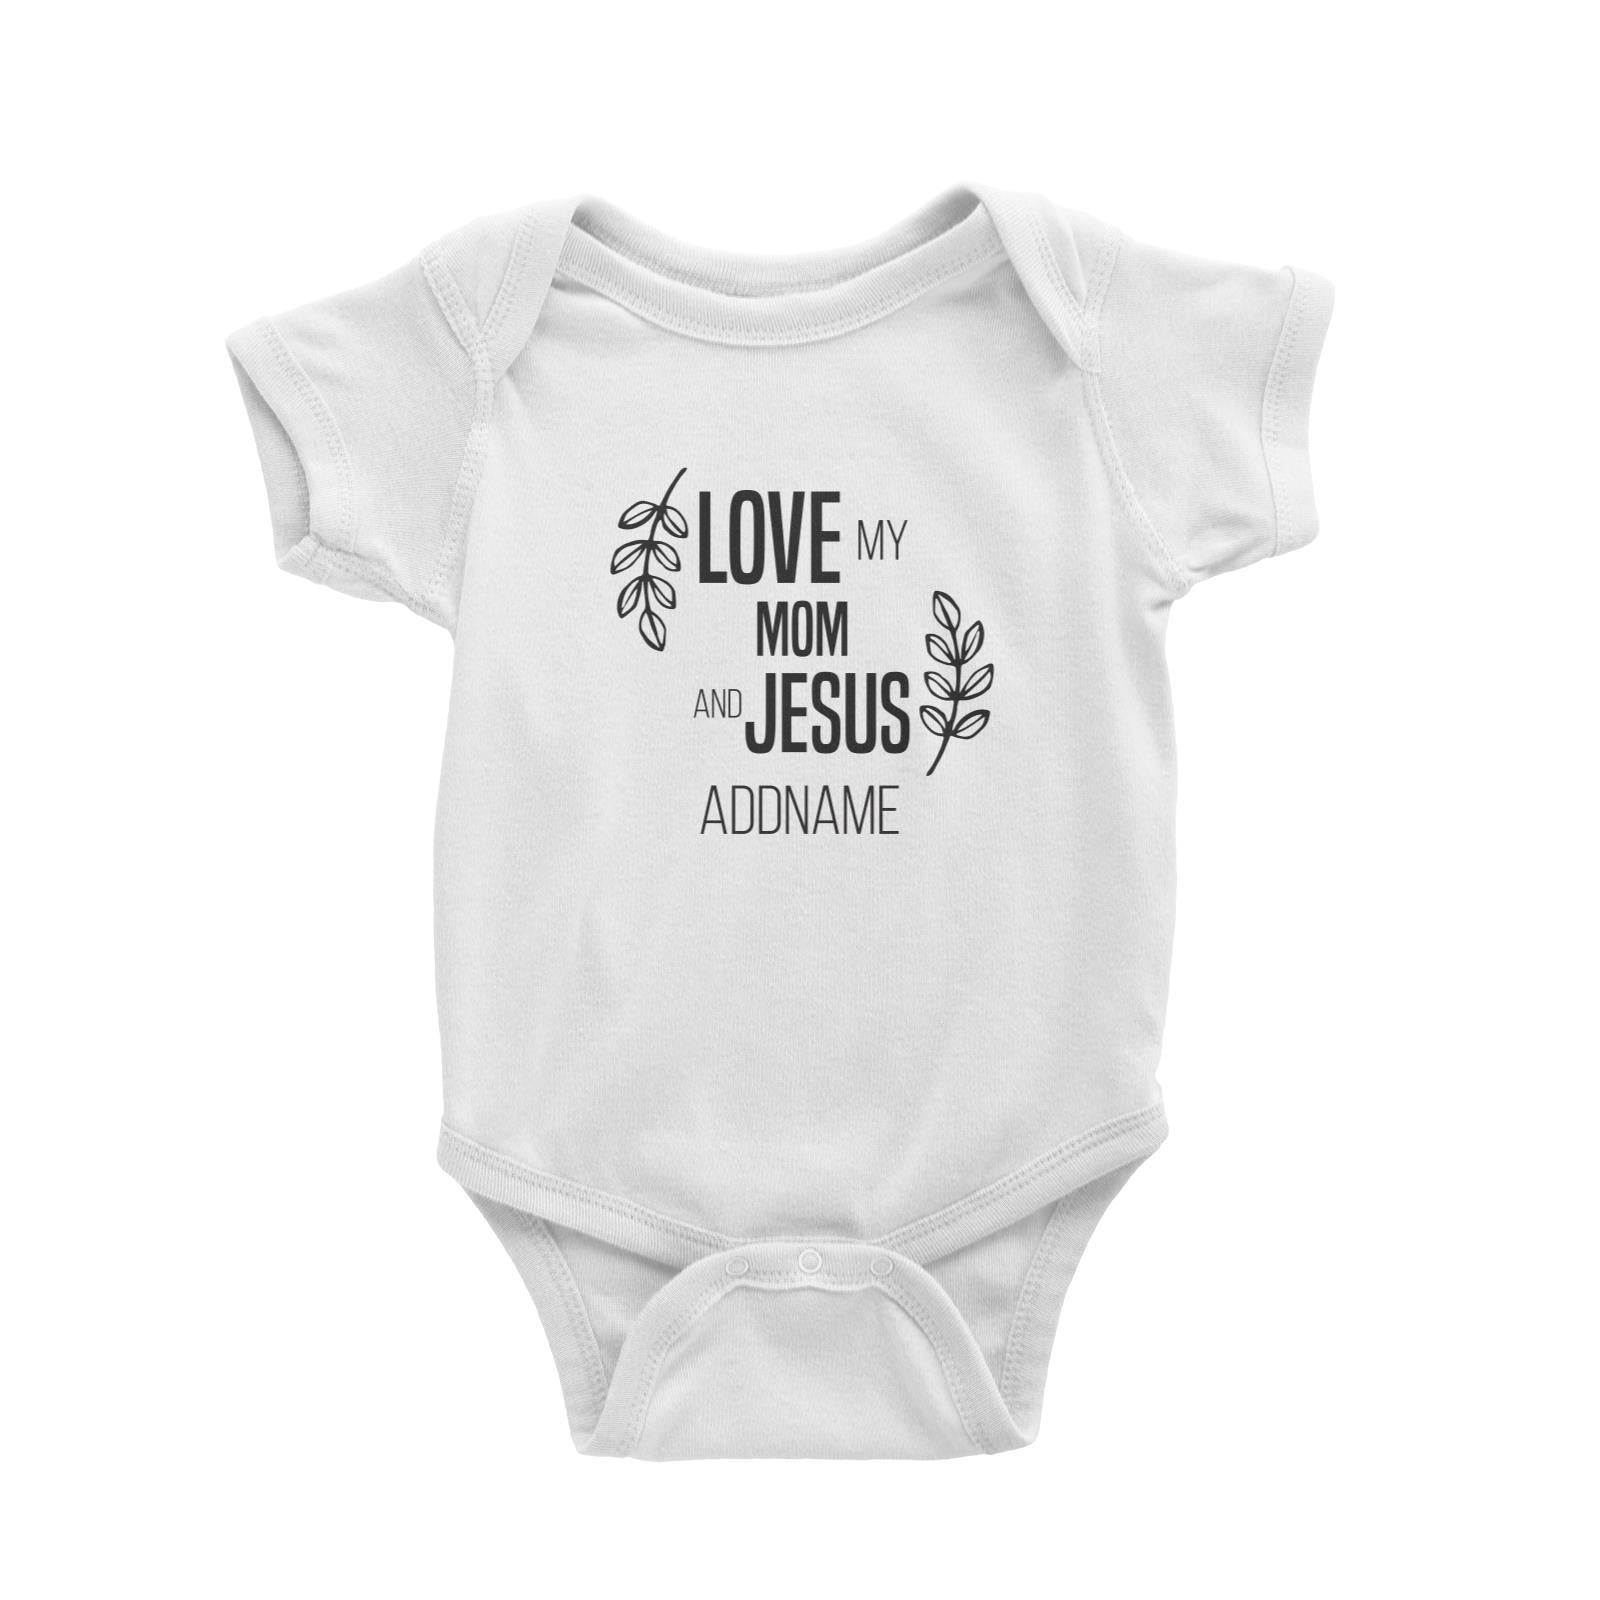 Christian Series Love My Mom And Jesus Addname Baby Romper